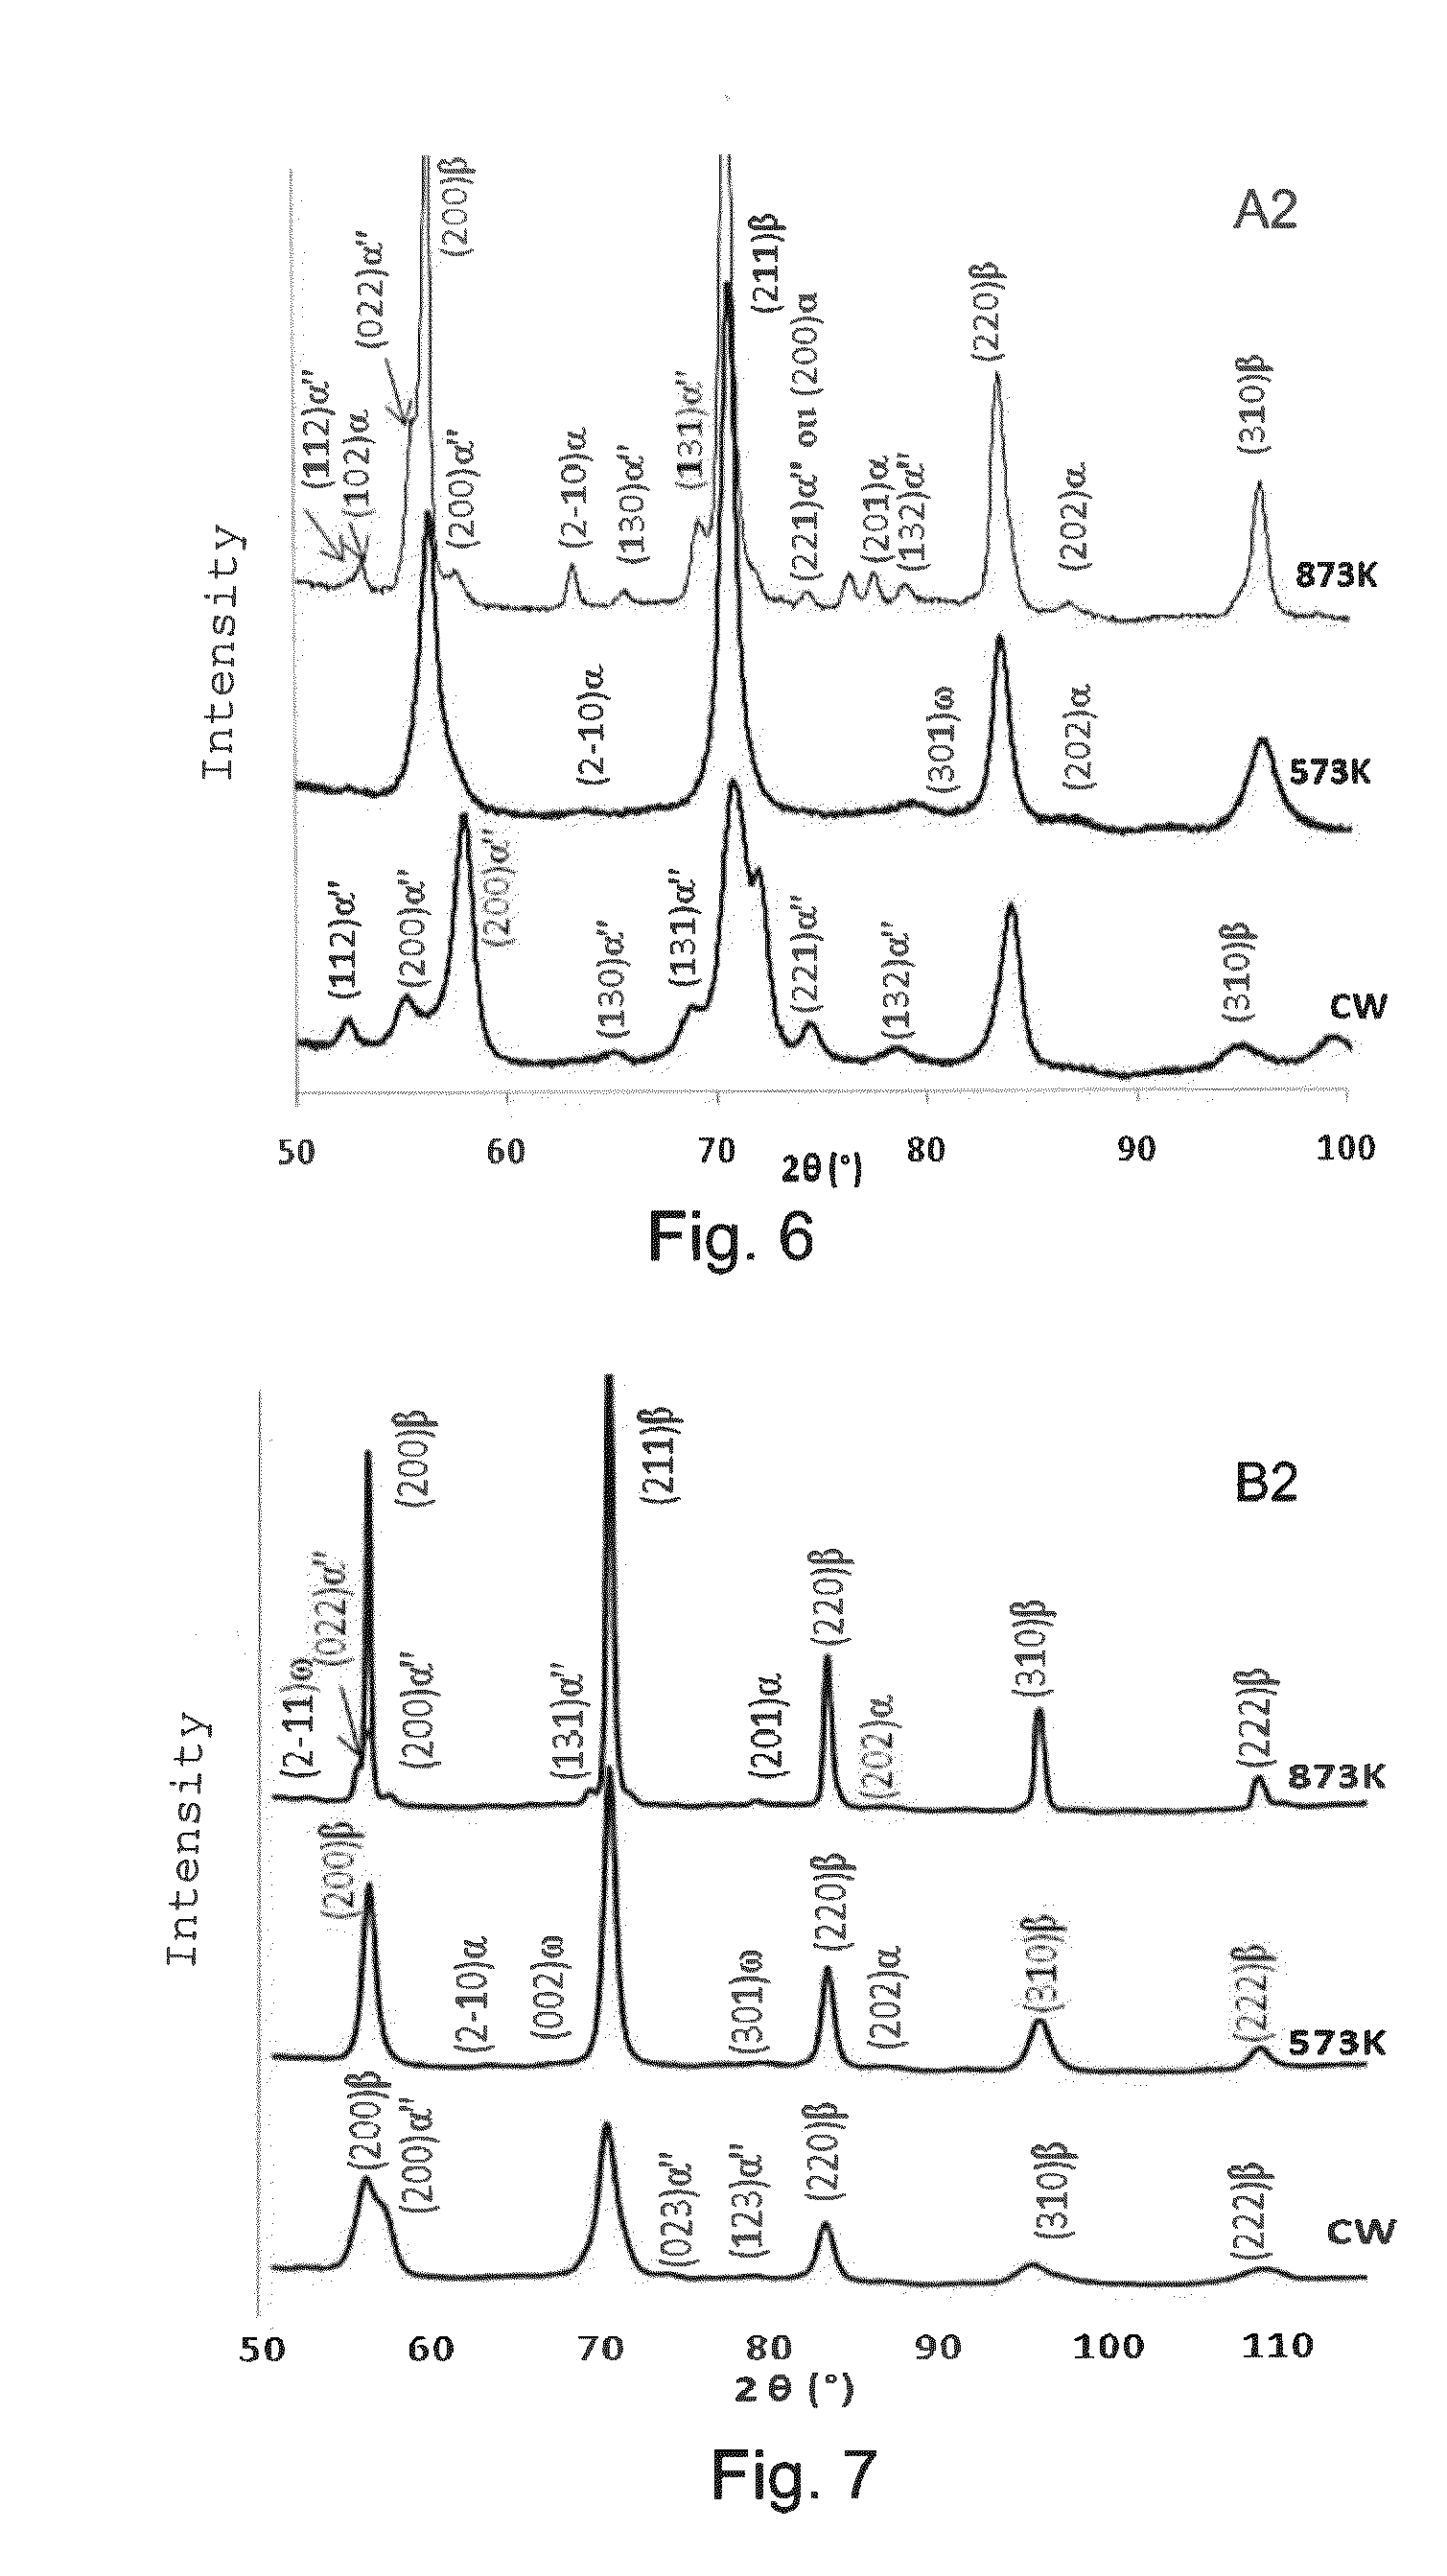 Method for the thermomechanical treatment of a titanium alloy, and resulting alloy and prosthesis